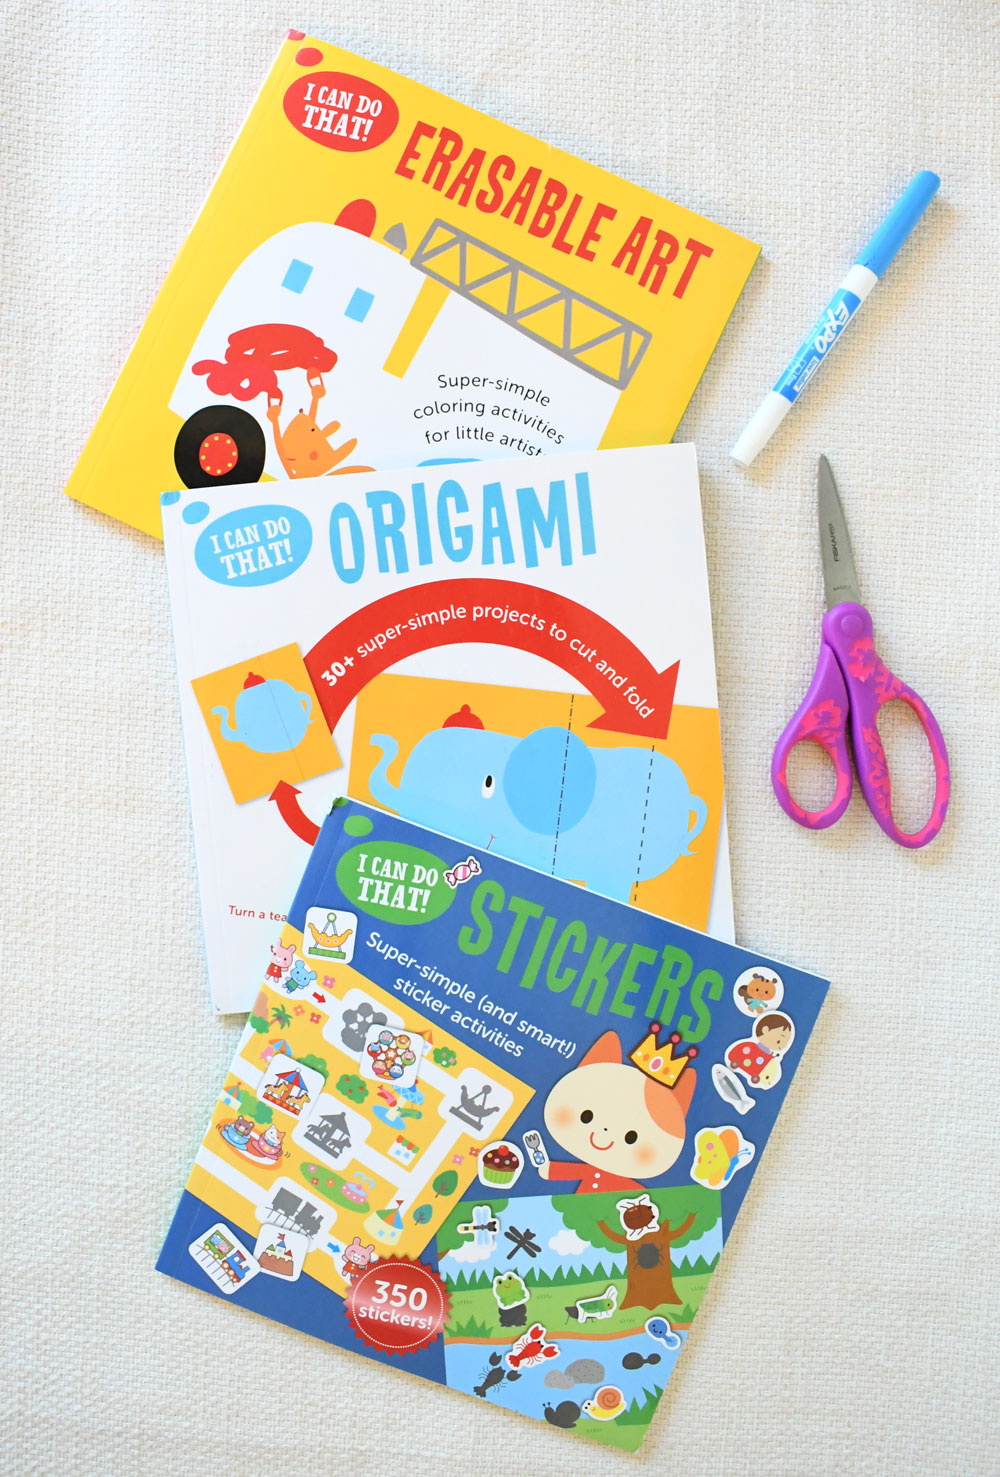 I Can Do That! interactive kids workbooks